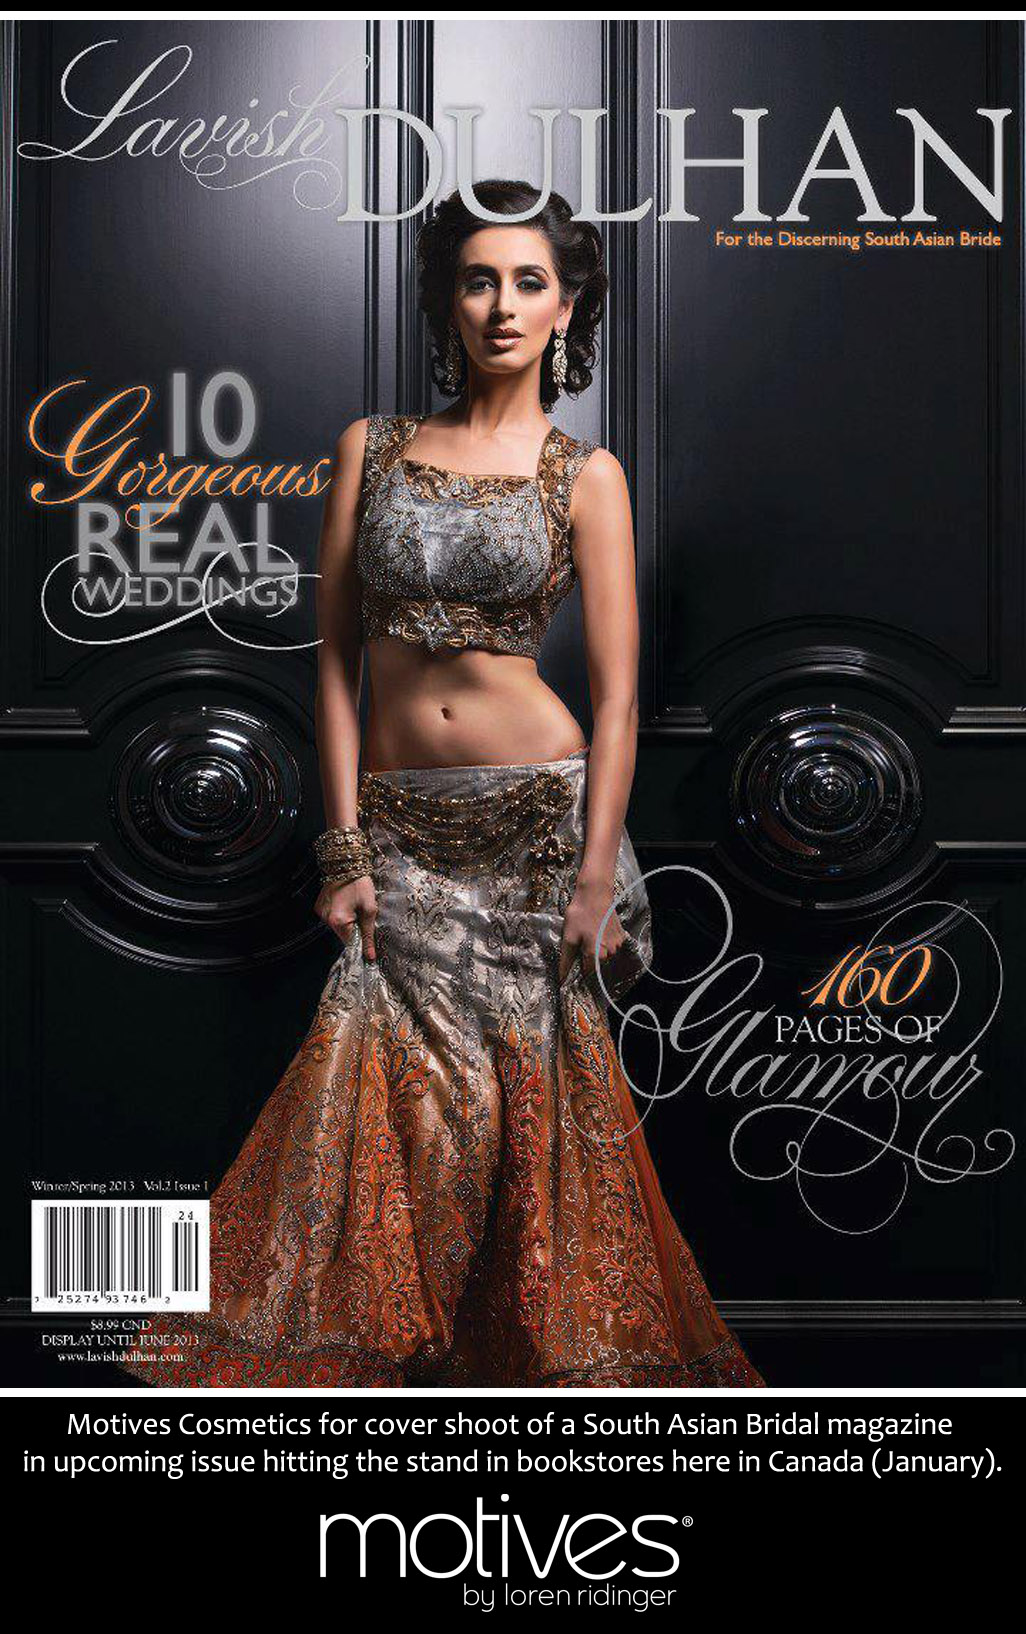 Motives on the Cover of Lavish Dulhan.